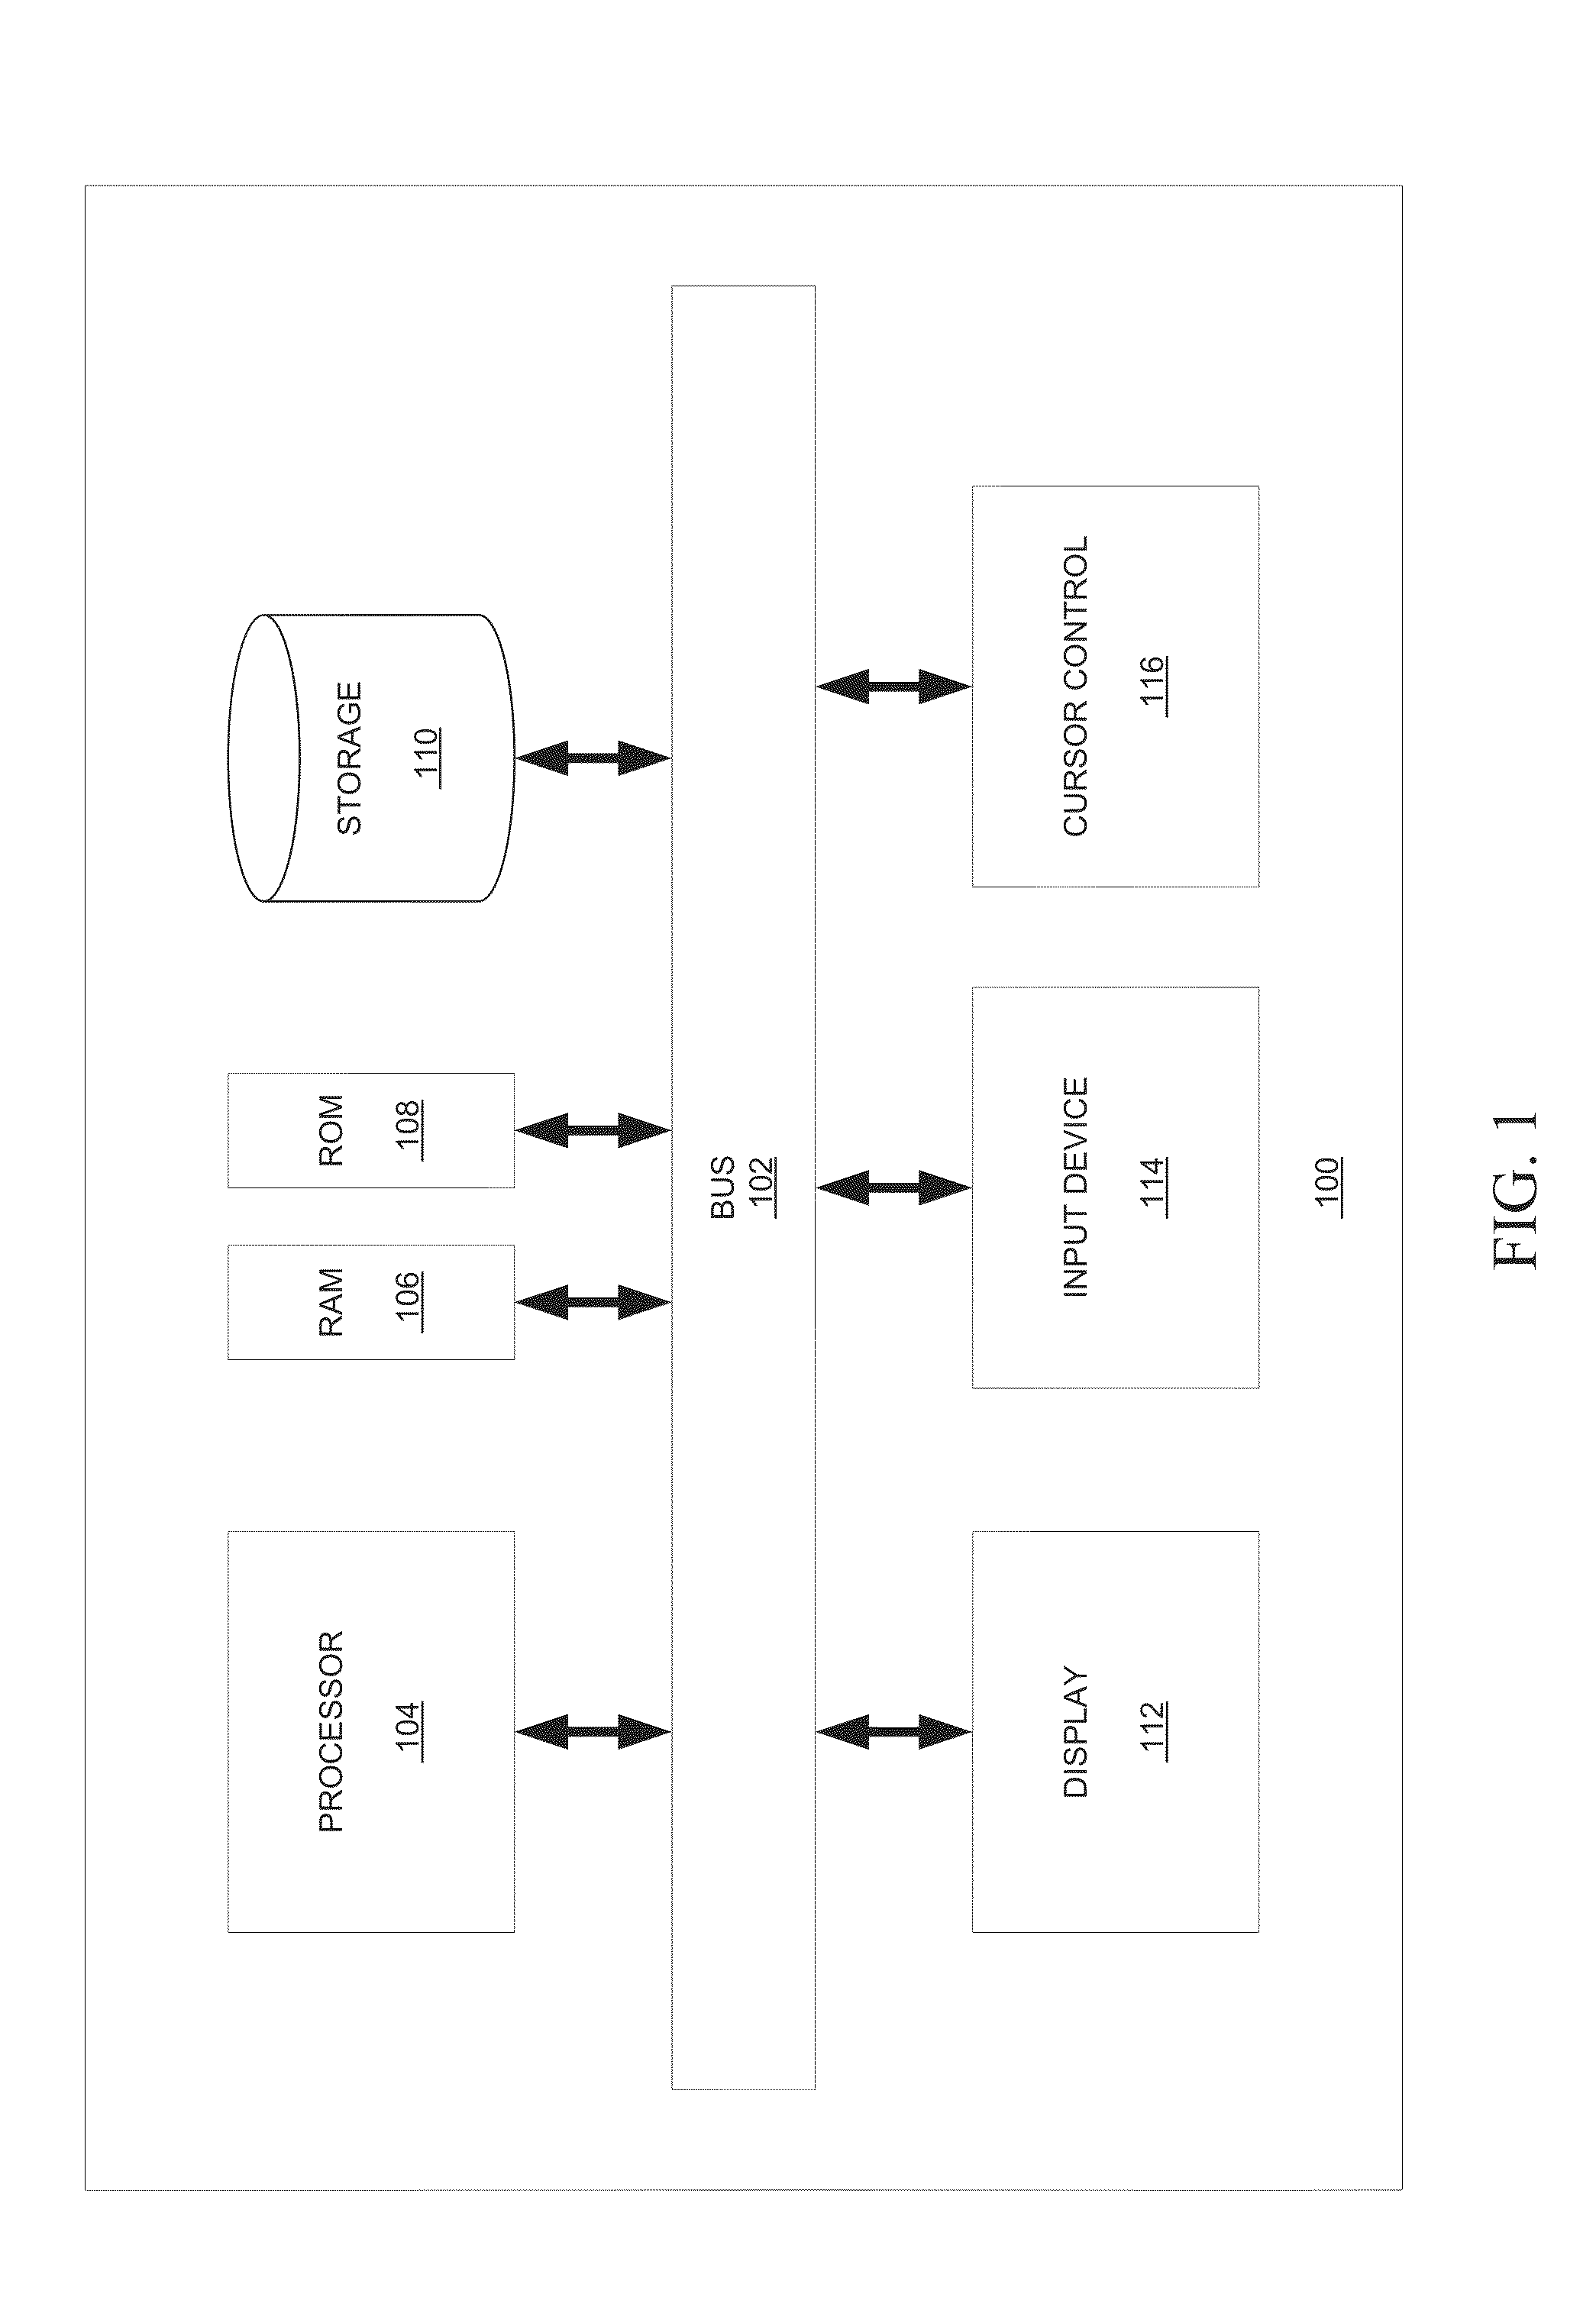 Systems and methods for analysis and interpretation of nucleic acid sequence data